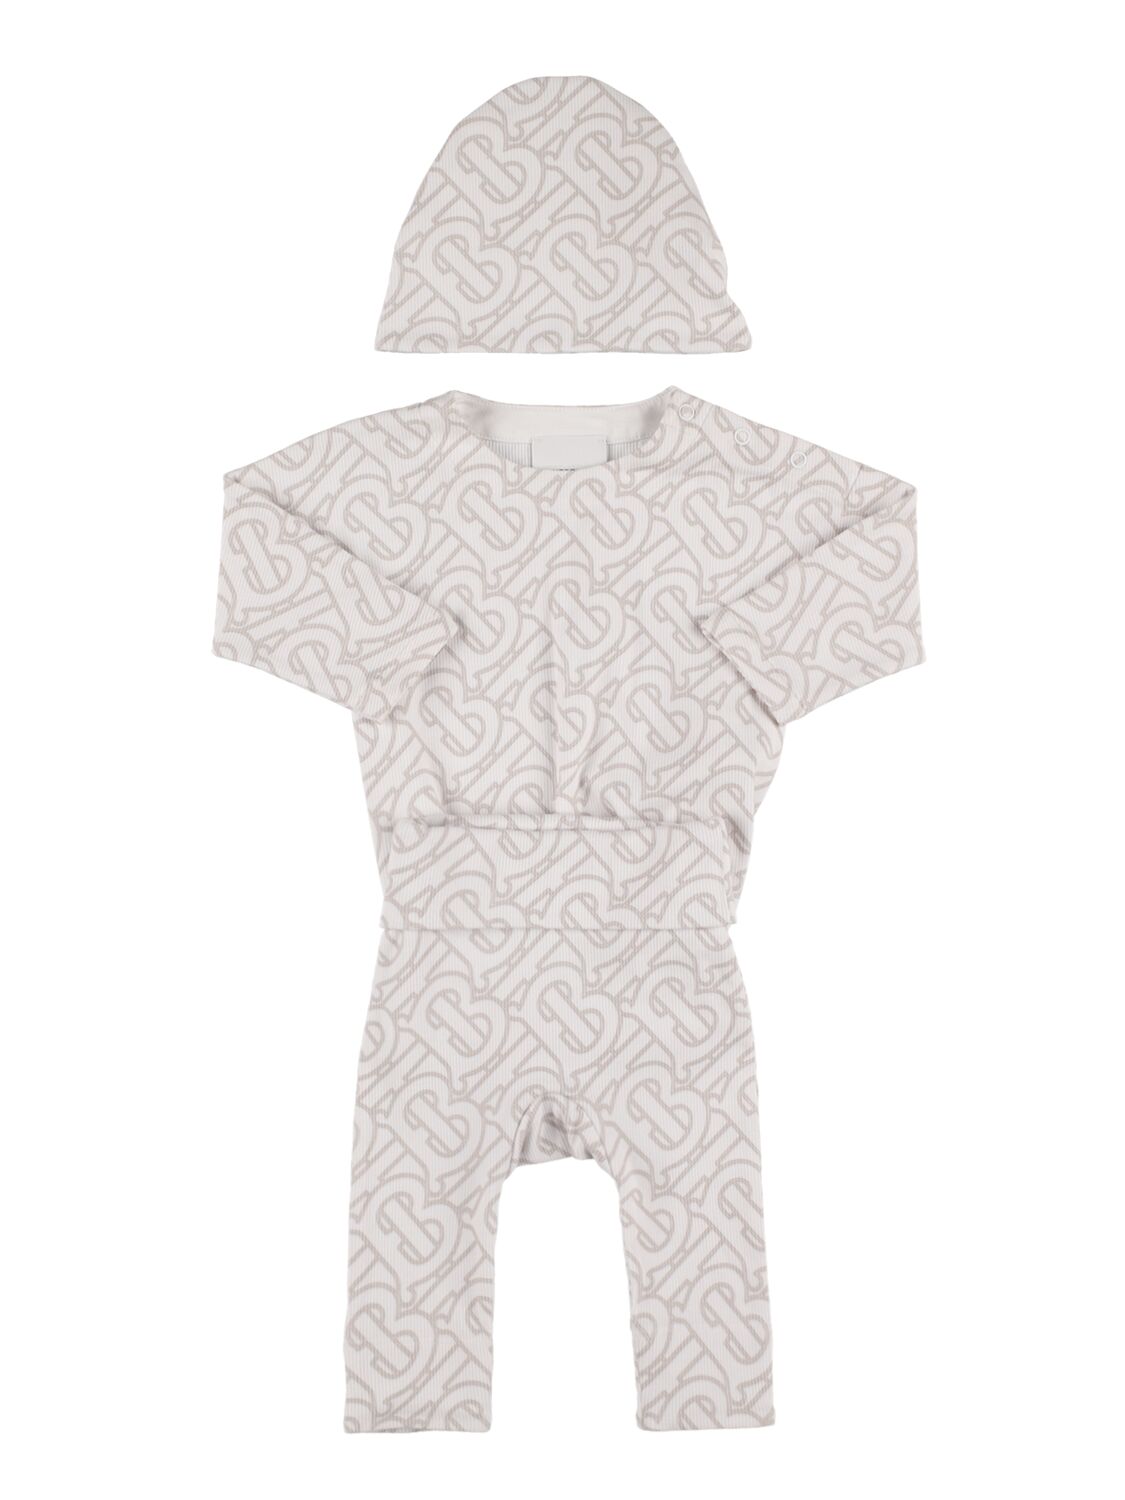 Burberry Babies' Cotton Blend Bodysuit, Pants And Hat In White